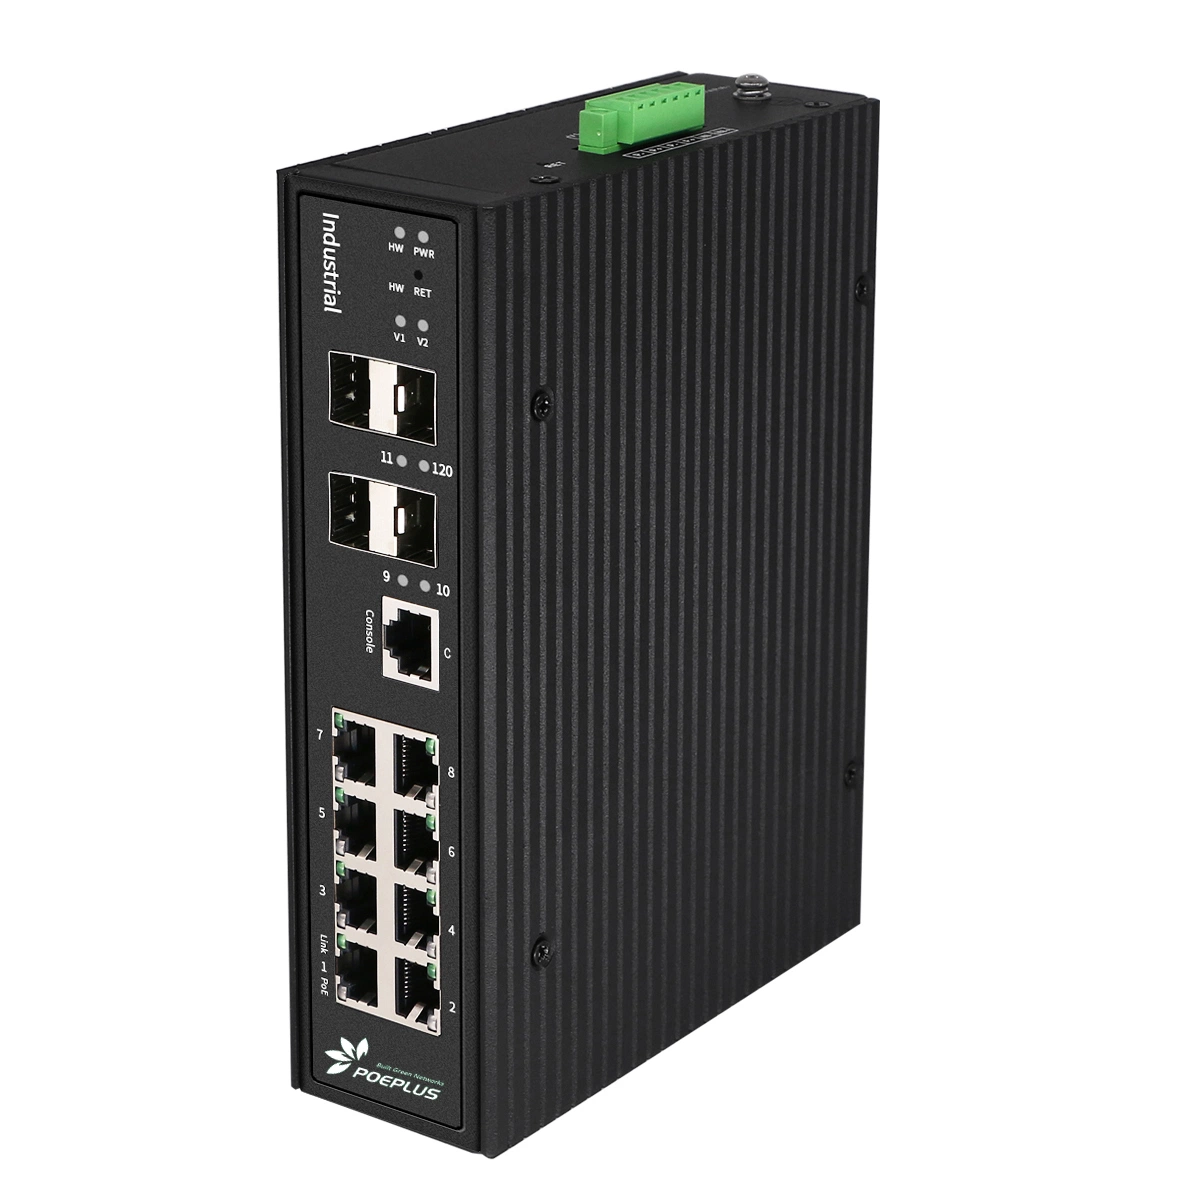 8 Ports Industry Poe Switch with 4X10g SFP+ Uplink L3 Managed